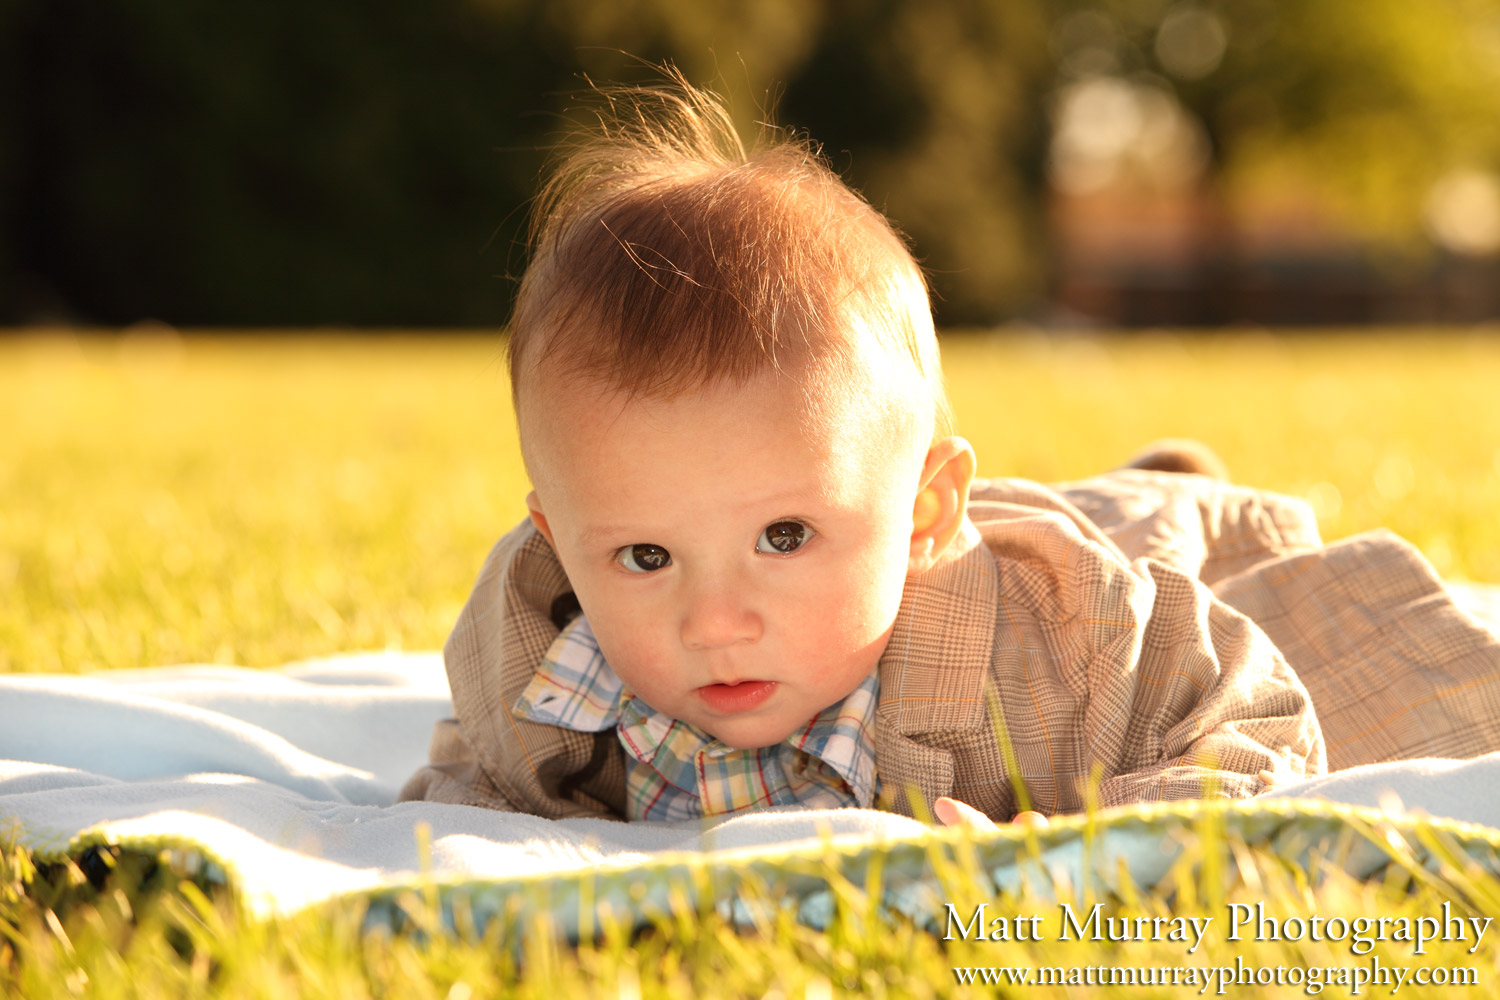 Vancouver Baby Portraits Photography Service